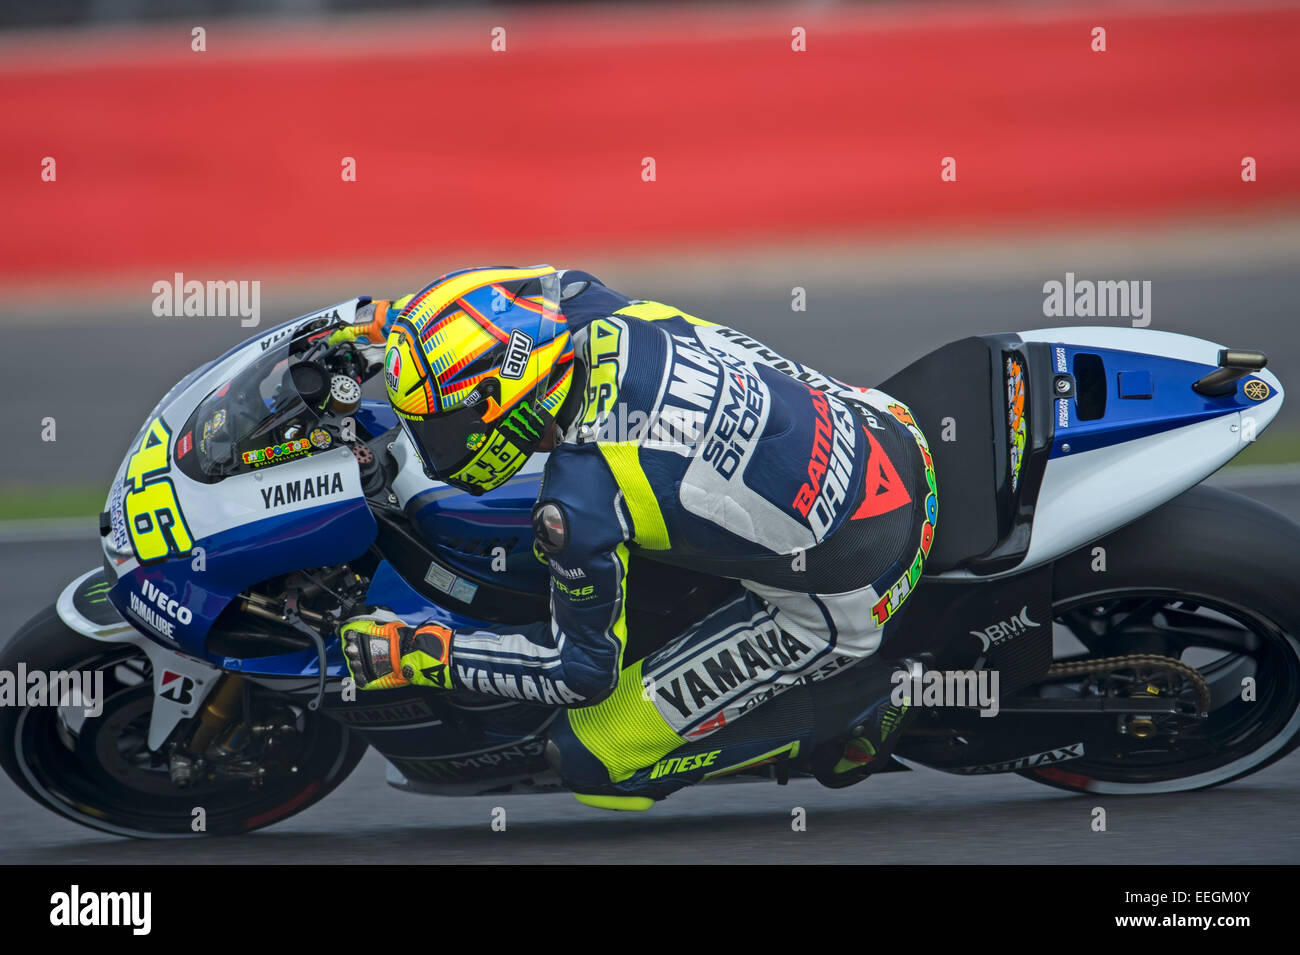 Valentino rossi on the yamaha moto gp bike hi-res stock photography and  images - Alamy